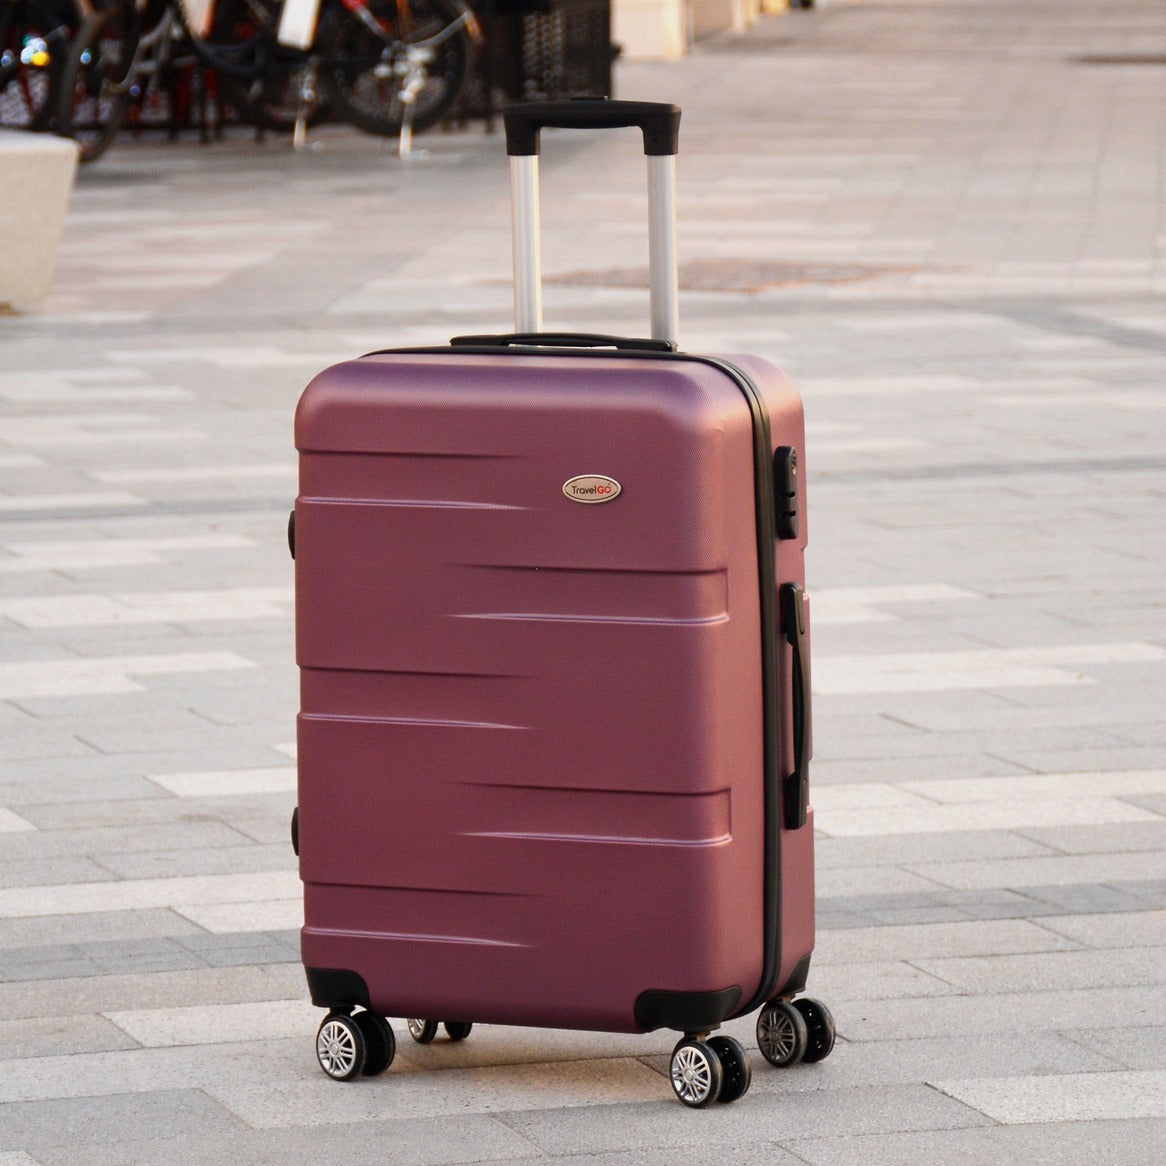 24" Purplish Red Colour JIAN ABS 559 Luggage Lightweight Hard Case Trolley Bag with Spinner Wheel